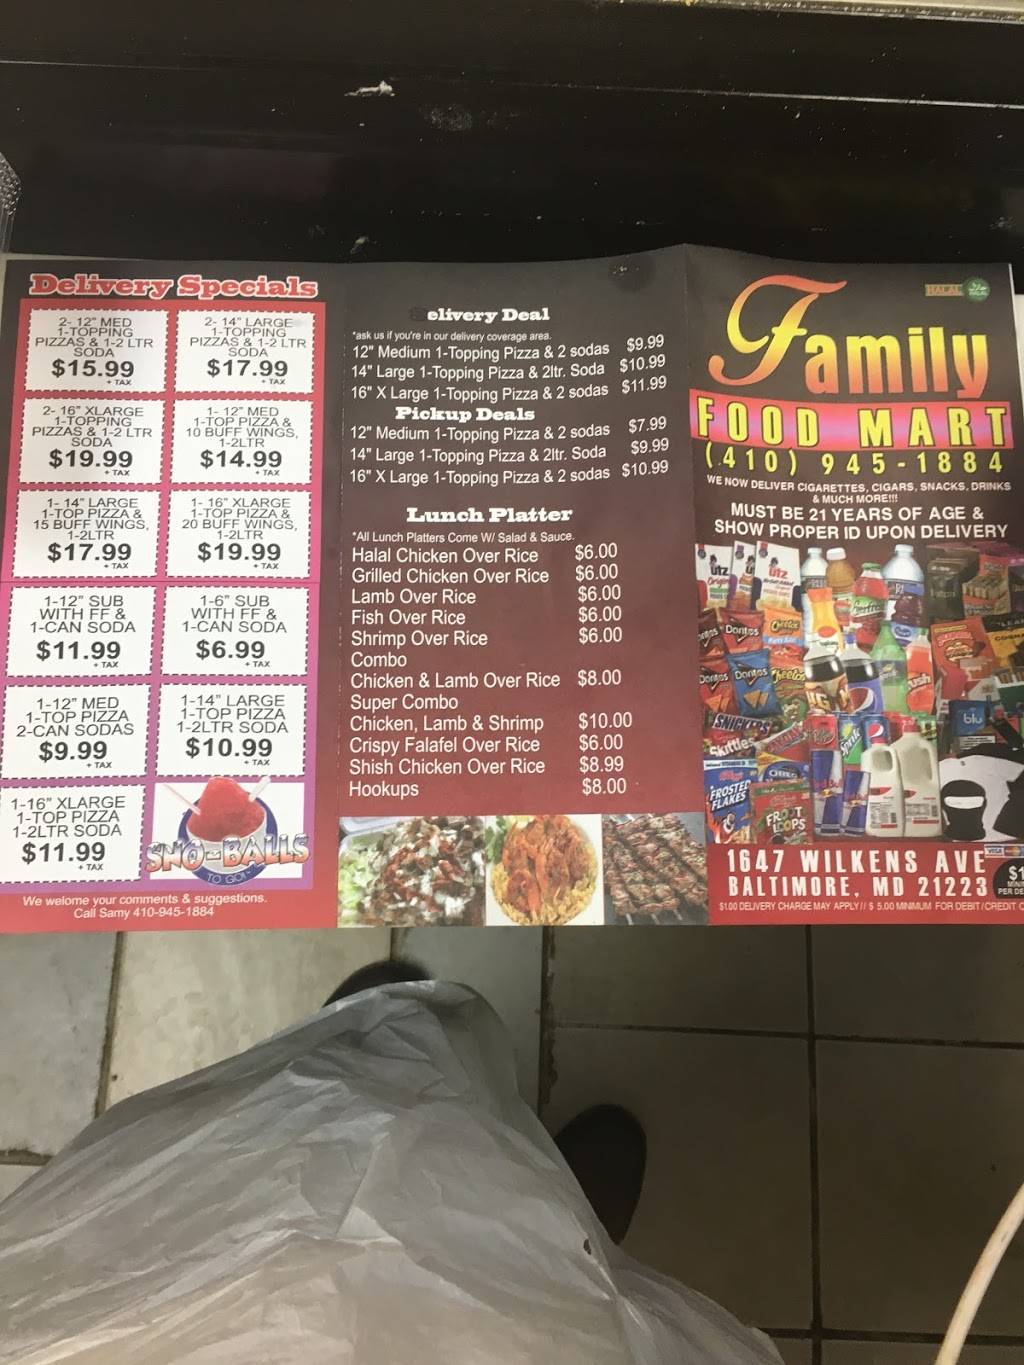 Family food market | 1647 Wilkens Ave, Baltimore, MD 21223 | Phone: (410) 945-1884